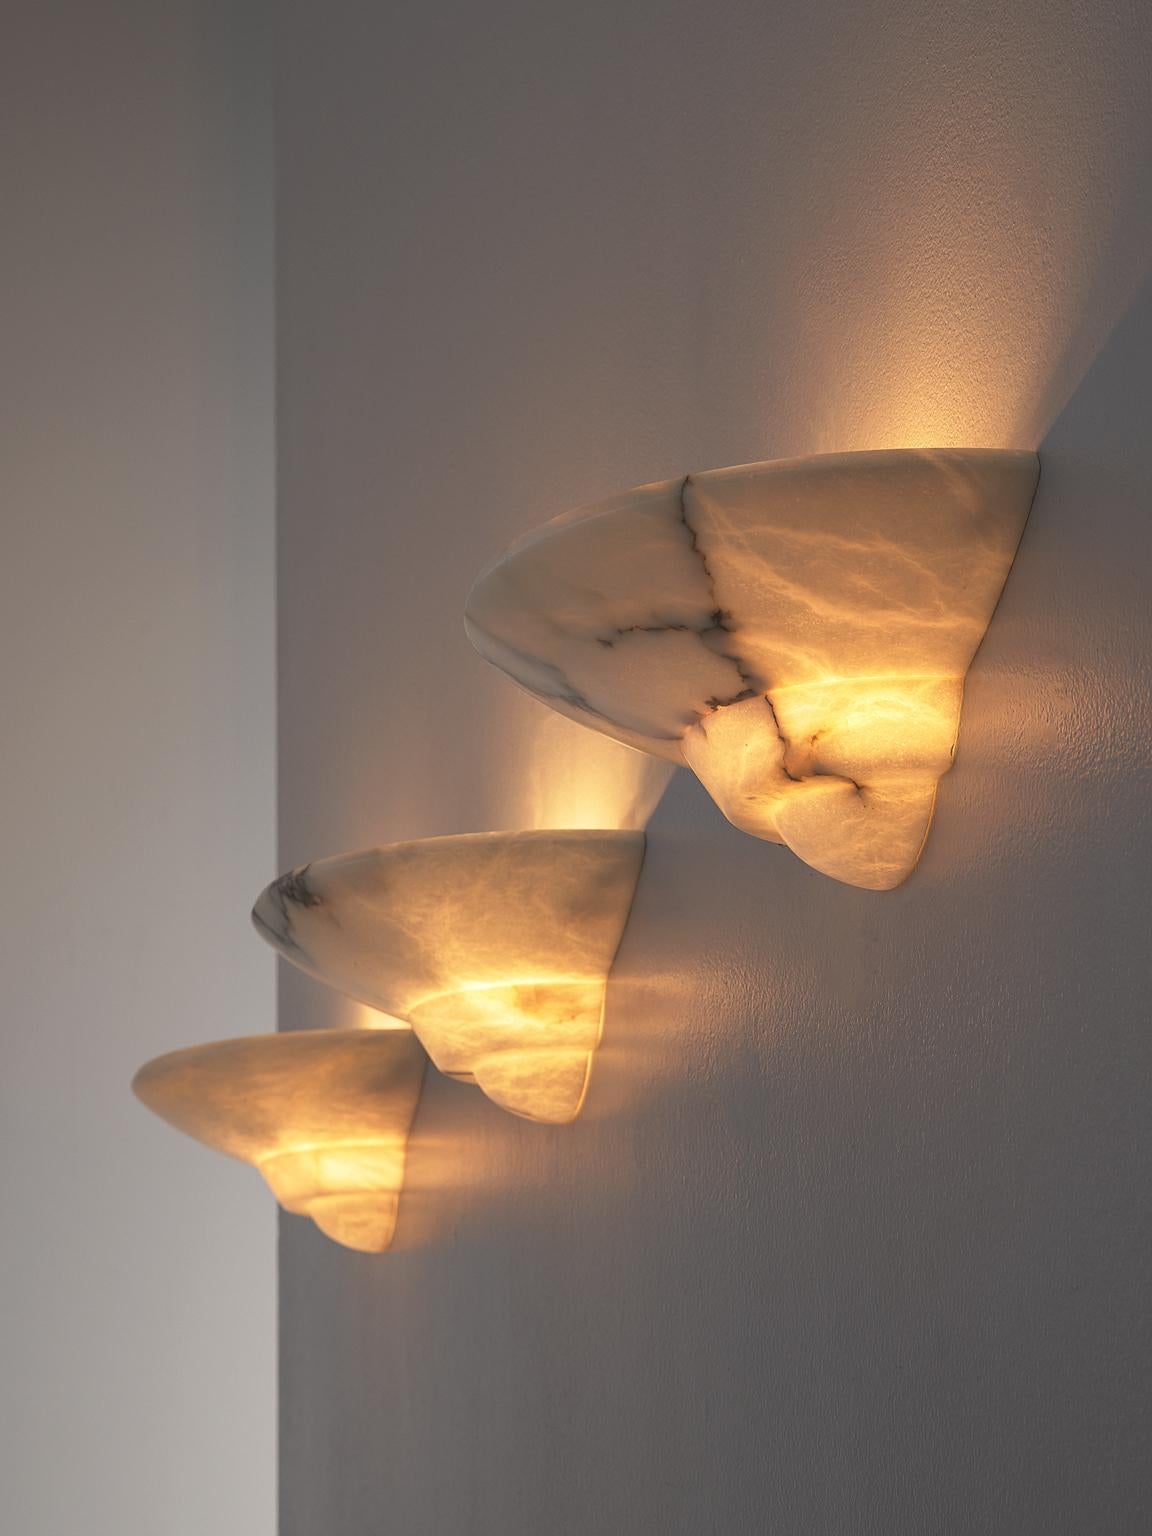 Sarreal Art, wall lights, alabaster, Spain, 1970s

Set of very elegant sconces by Sarreal Art, designed in the late 1970s. The sconces are made of alabaster, which results in a beautiful range in shades of light through the material. The light